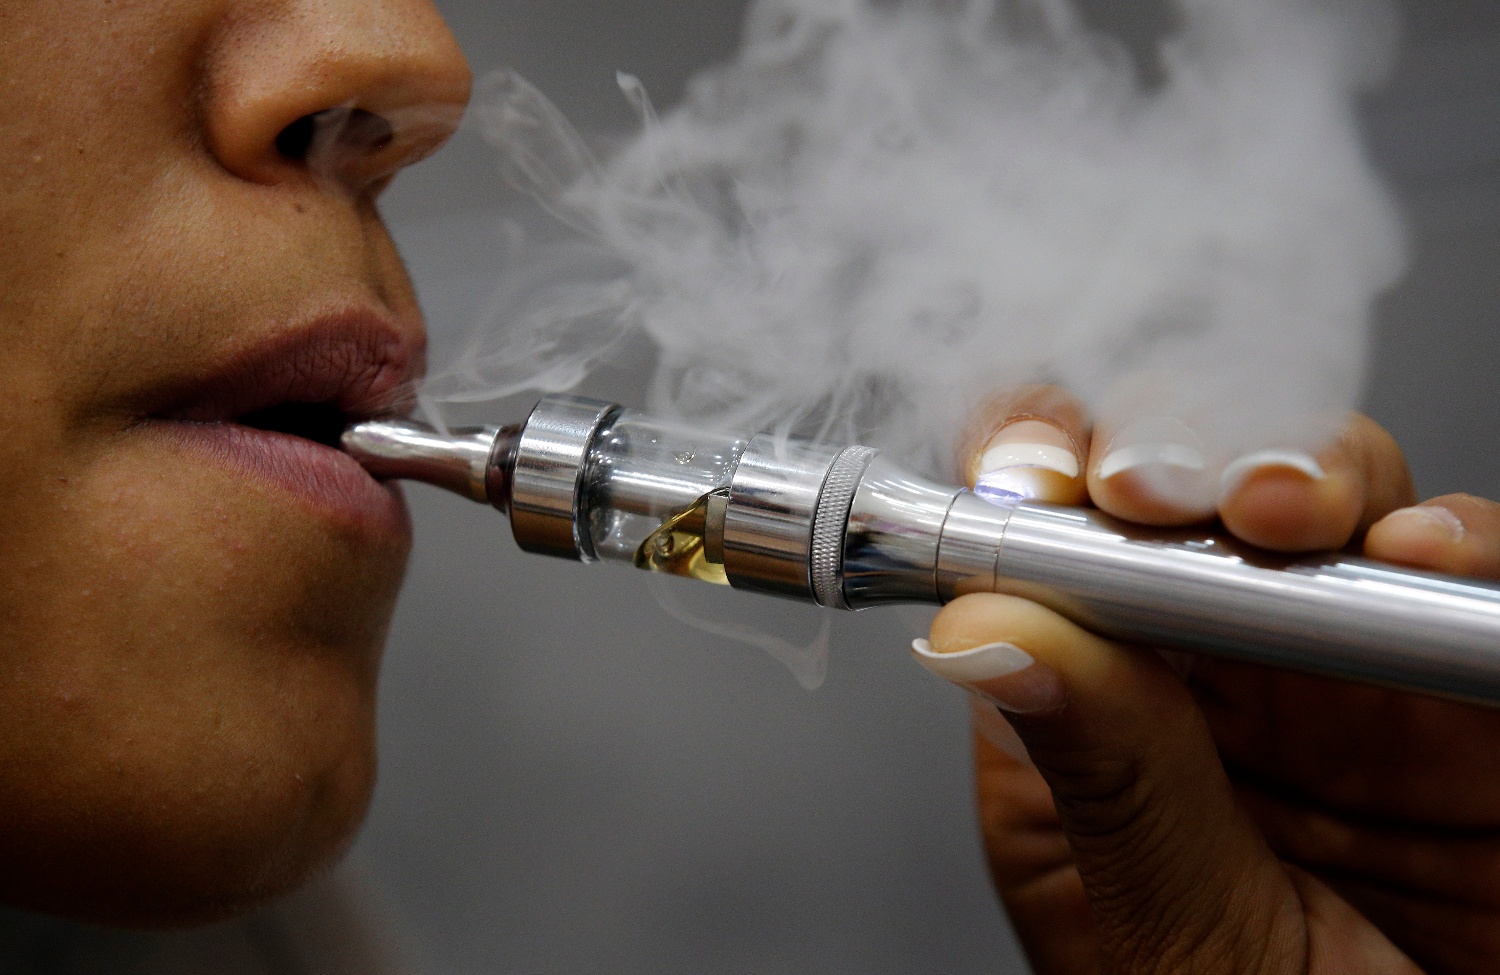 Electronic cigarettes are displayed in a Paris store, Tuesday, Oct. 8, 2013.